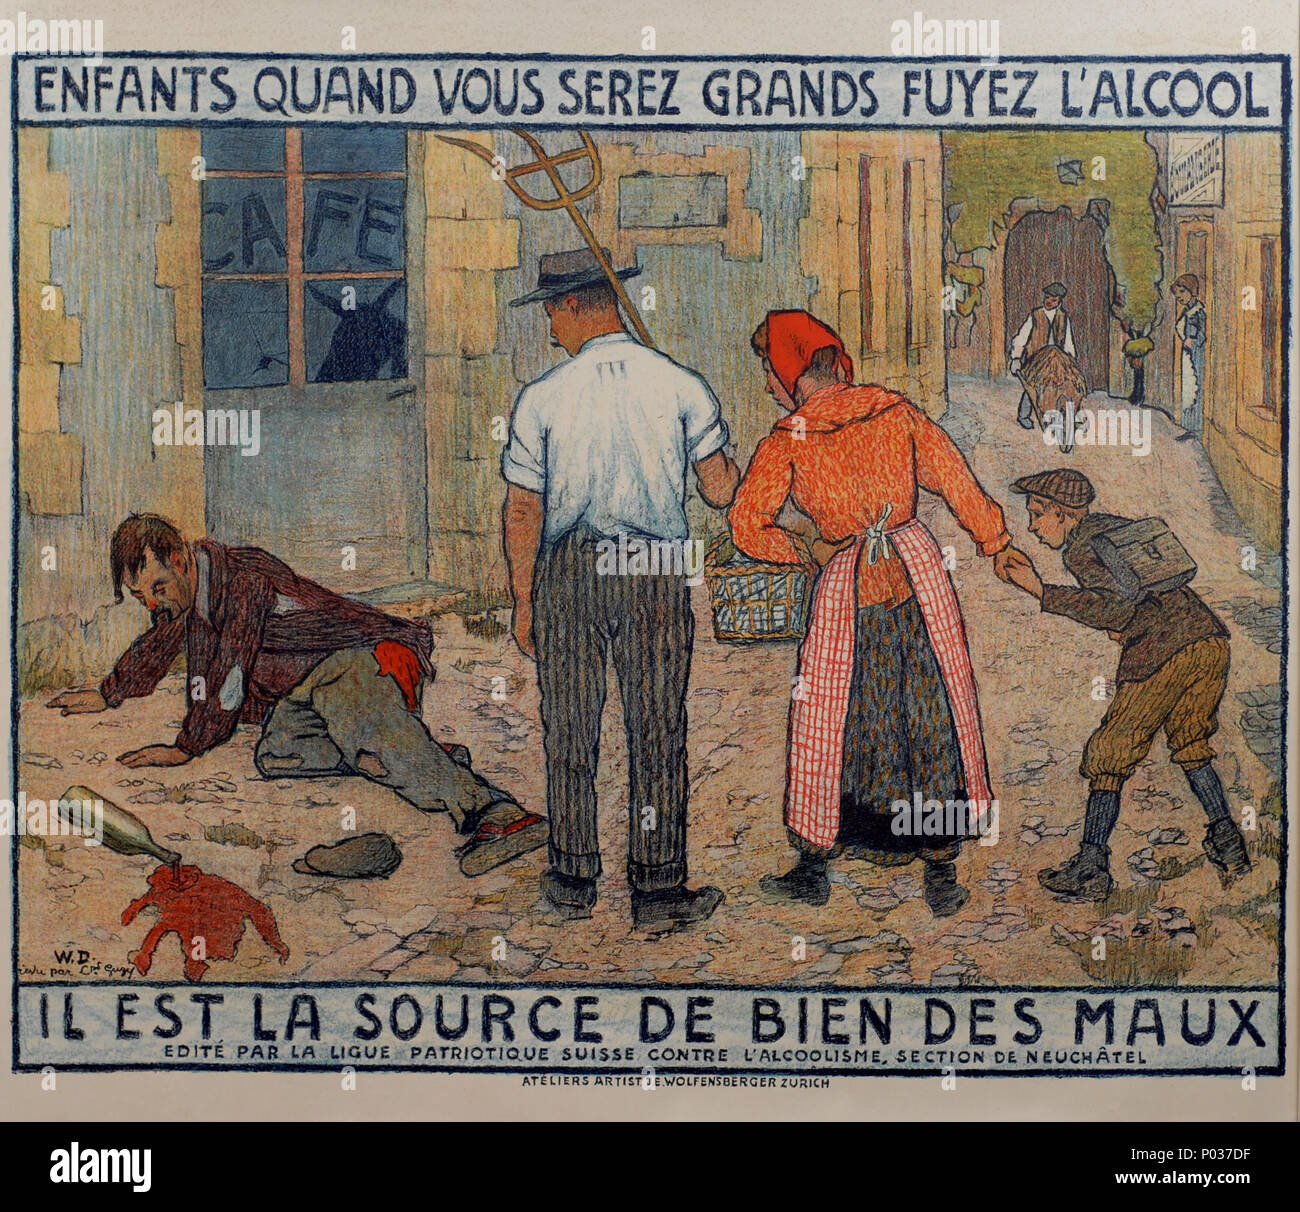 . English: A Swiss temperance poster from La Croix-bleue, Neuchatel, circa 1900. The text on the poster is 'ENFANTS QUAND VOUS SEREZ GRANDS FUYEZ L'ALCOOL IL EST LA SOURCE DE BIEN DES MAUX' which translates to 'CHILDREN WHEN YOU GROW UP STAY AWAY FROM ALCOHOL IT IS THE SOURCE OF MANY TROUBLES.' The poster is 88 x 110 cm. Printer: Atelier artist. J. E. Wolfensberger Zurich  . circa 1900. W. D. 3 La Croix-bleue poster Stock Photo